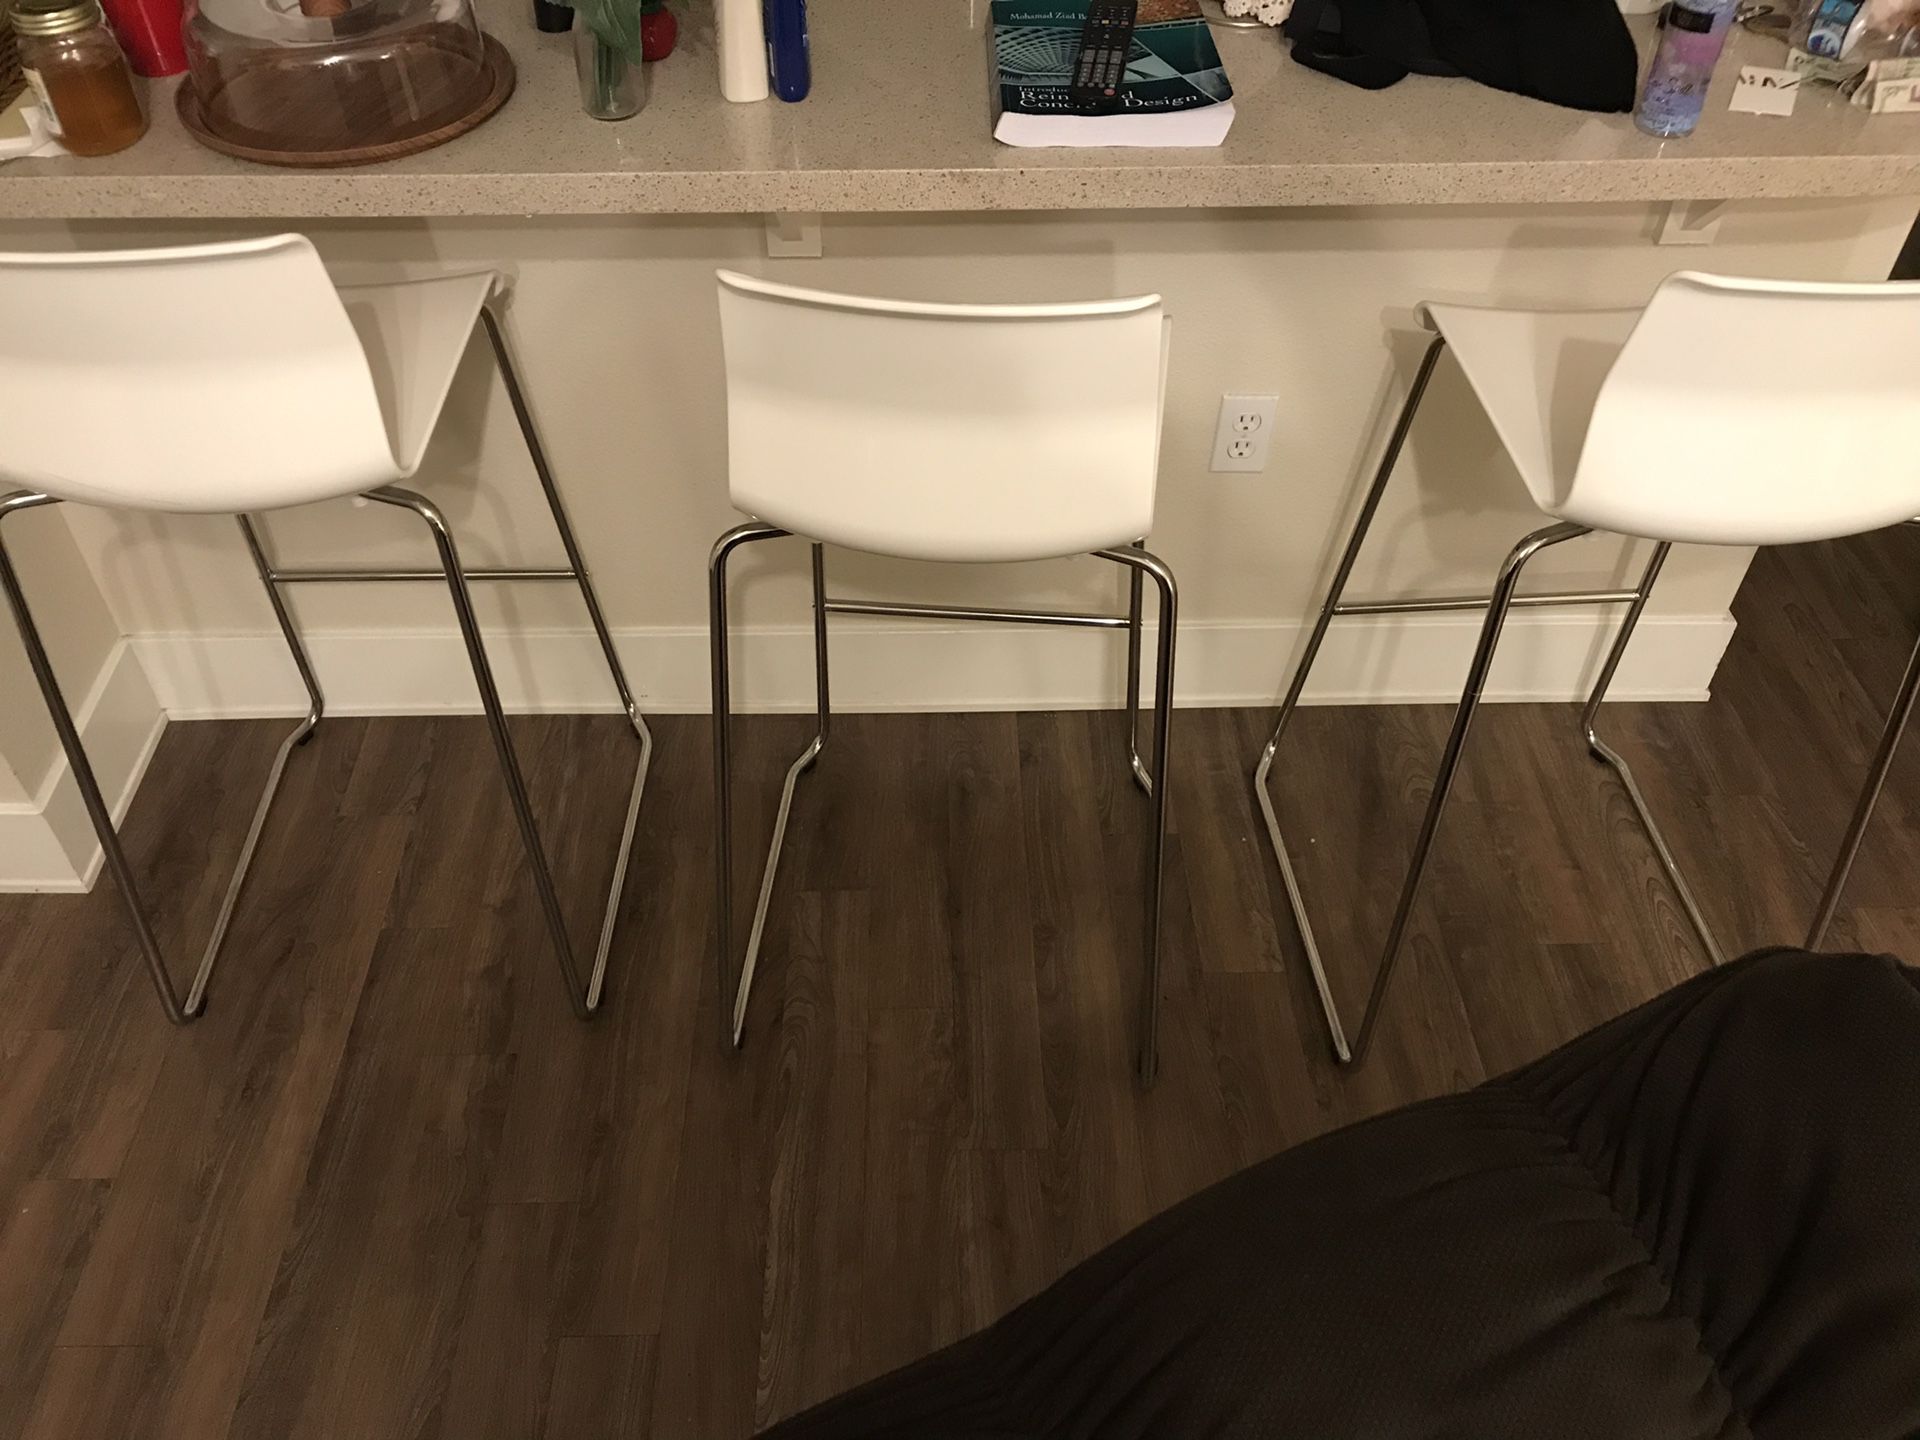 Counter chair